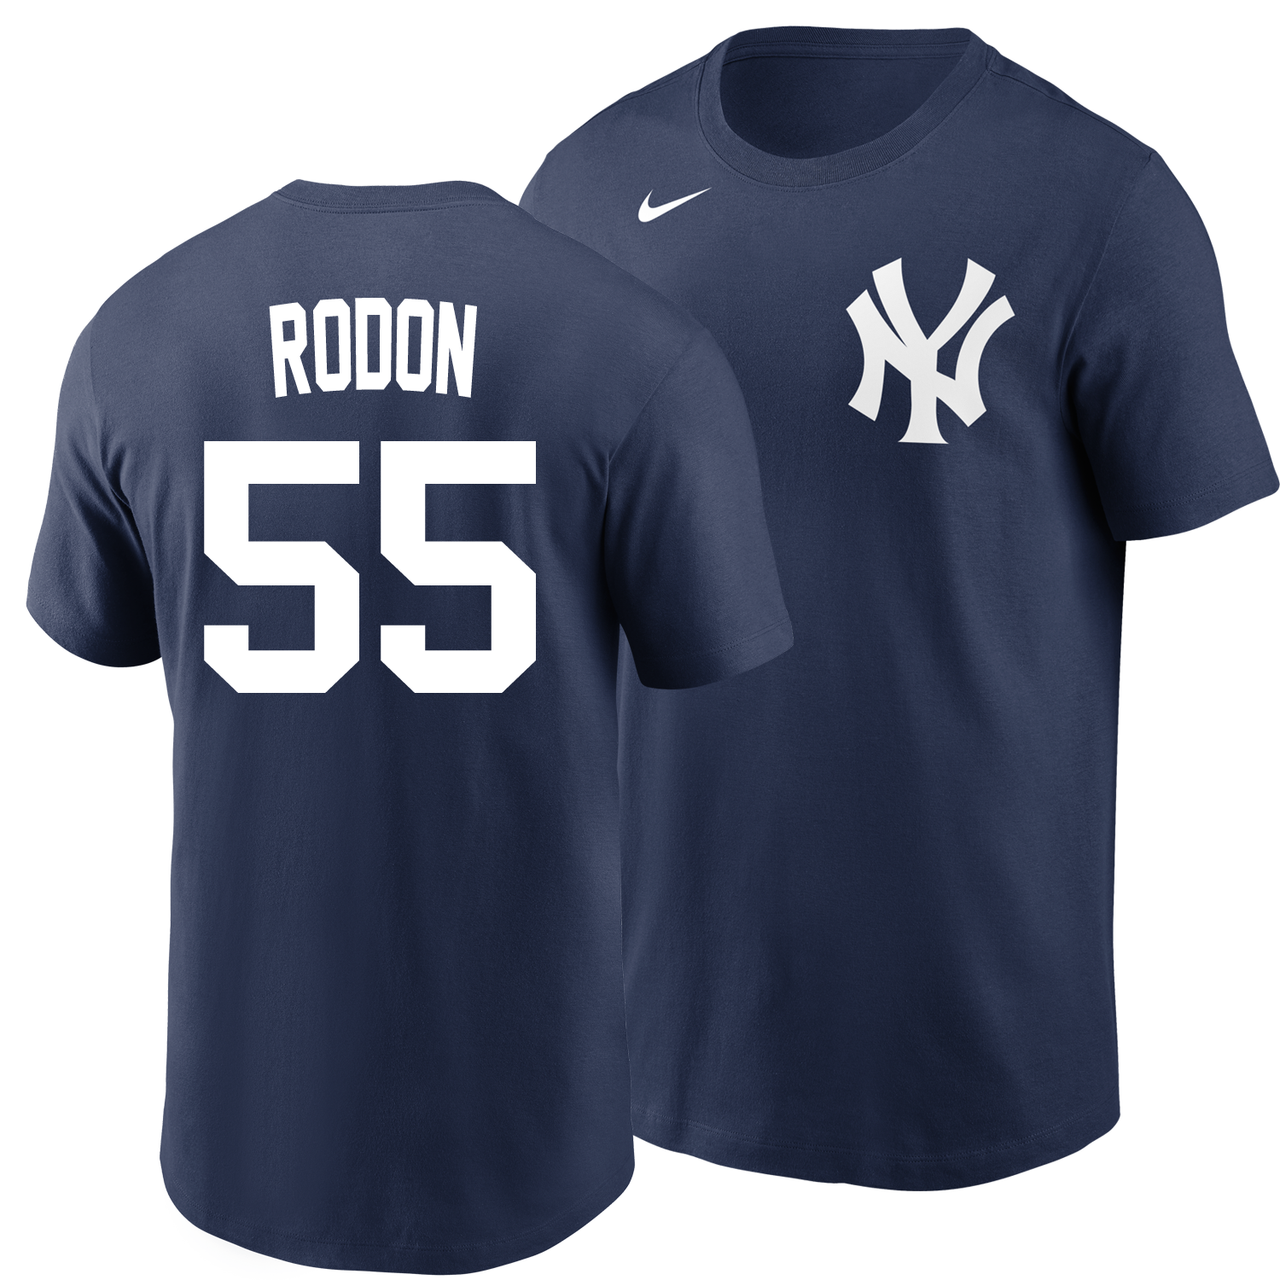 Men's Nike Carlos Rodon White/Navy New York Yankees Home Official Player Jersey Size: Small